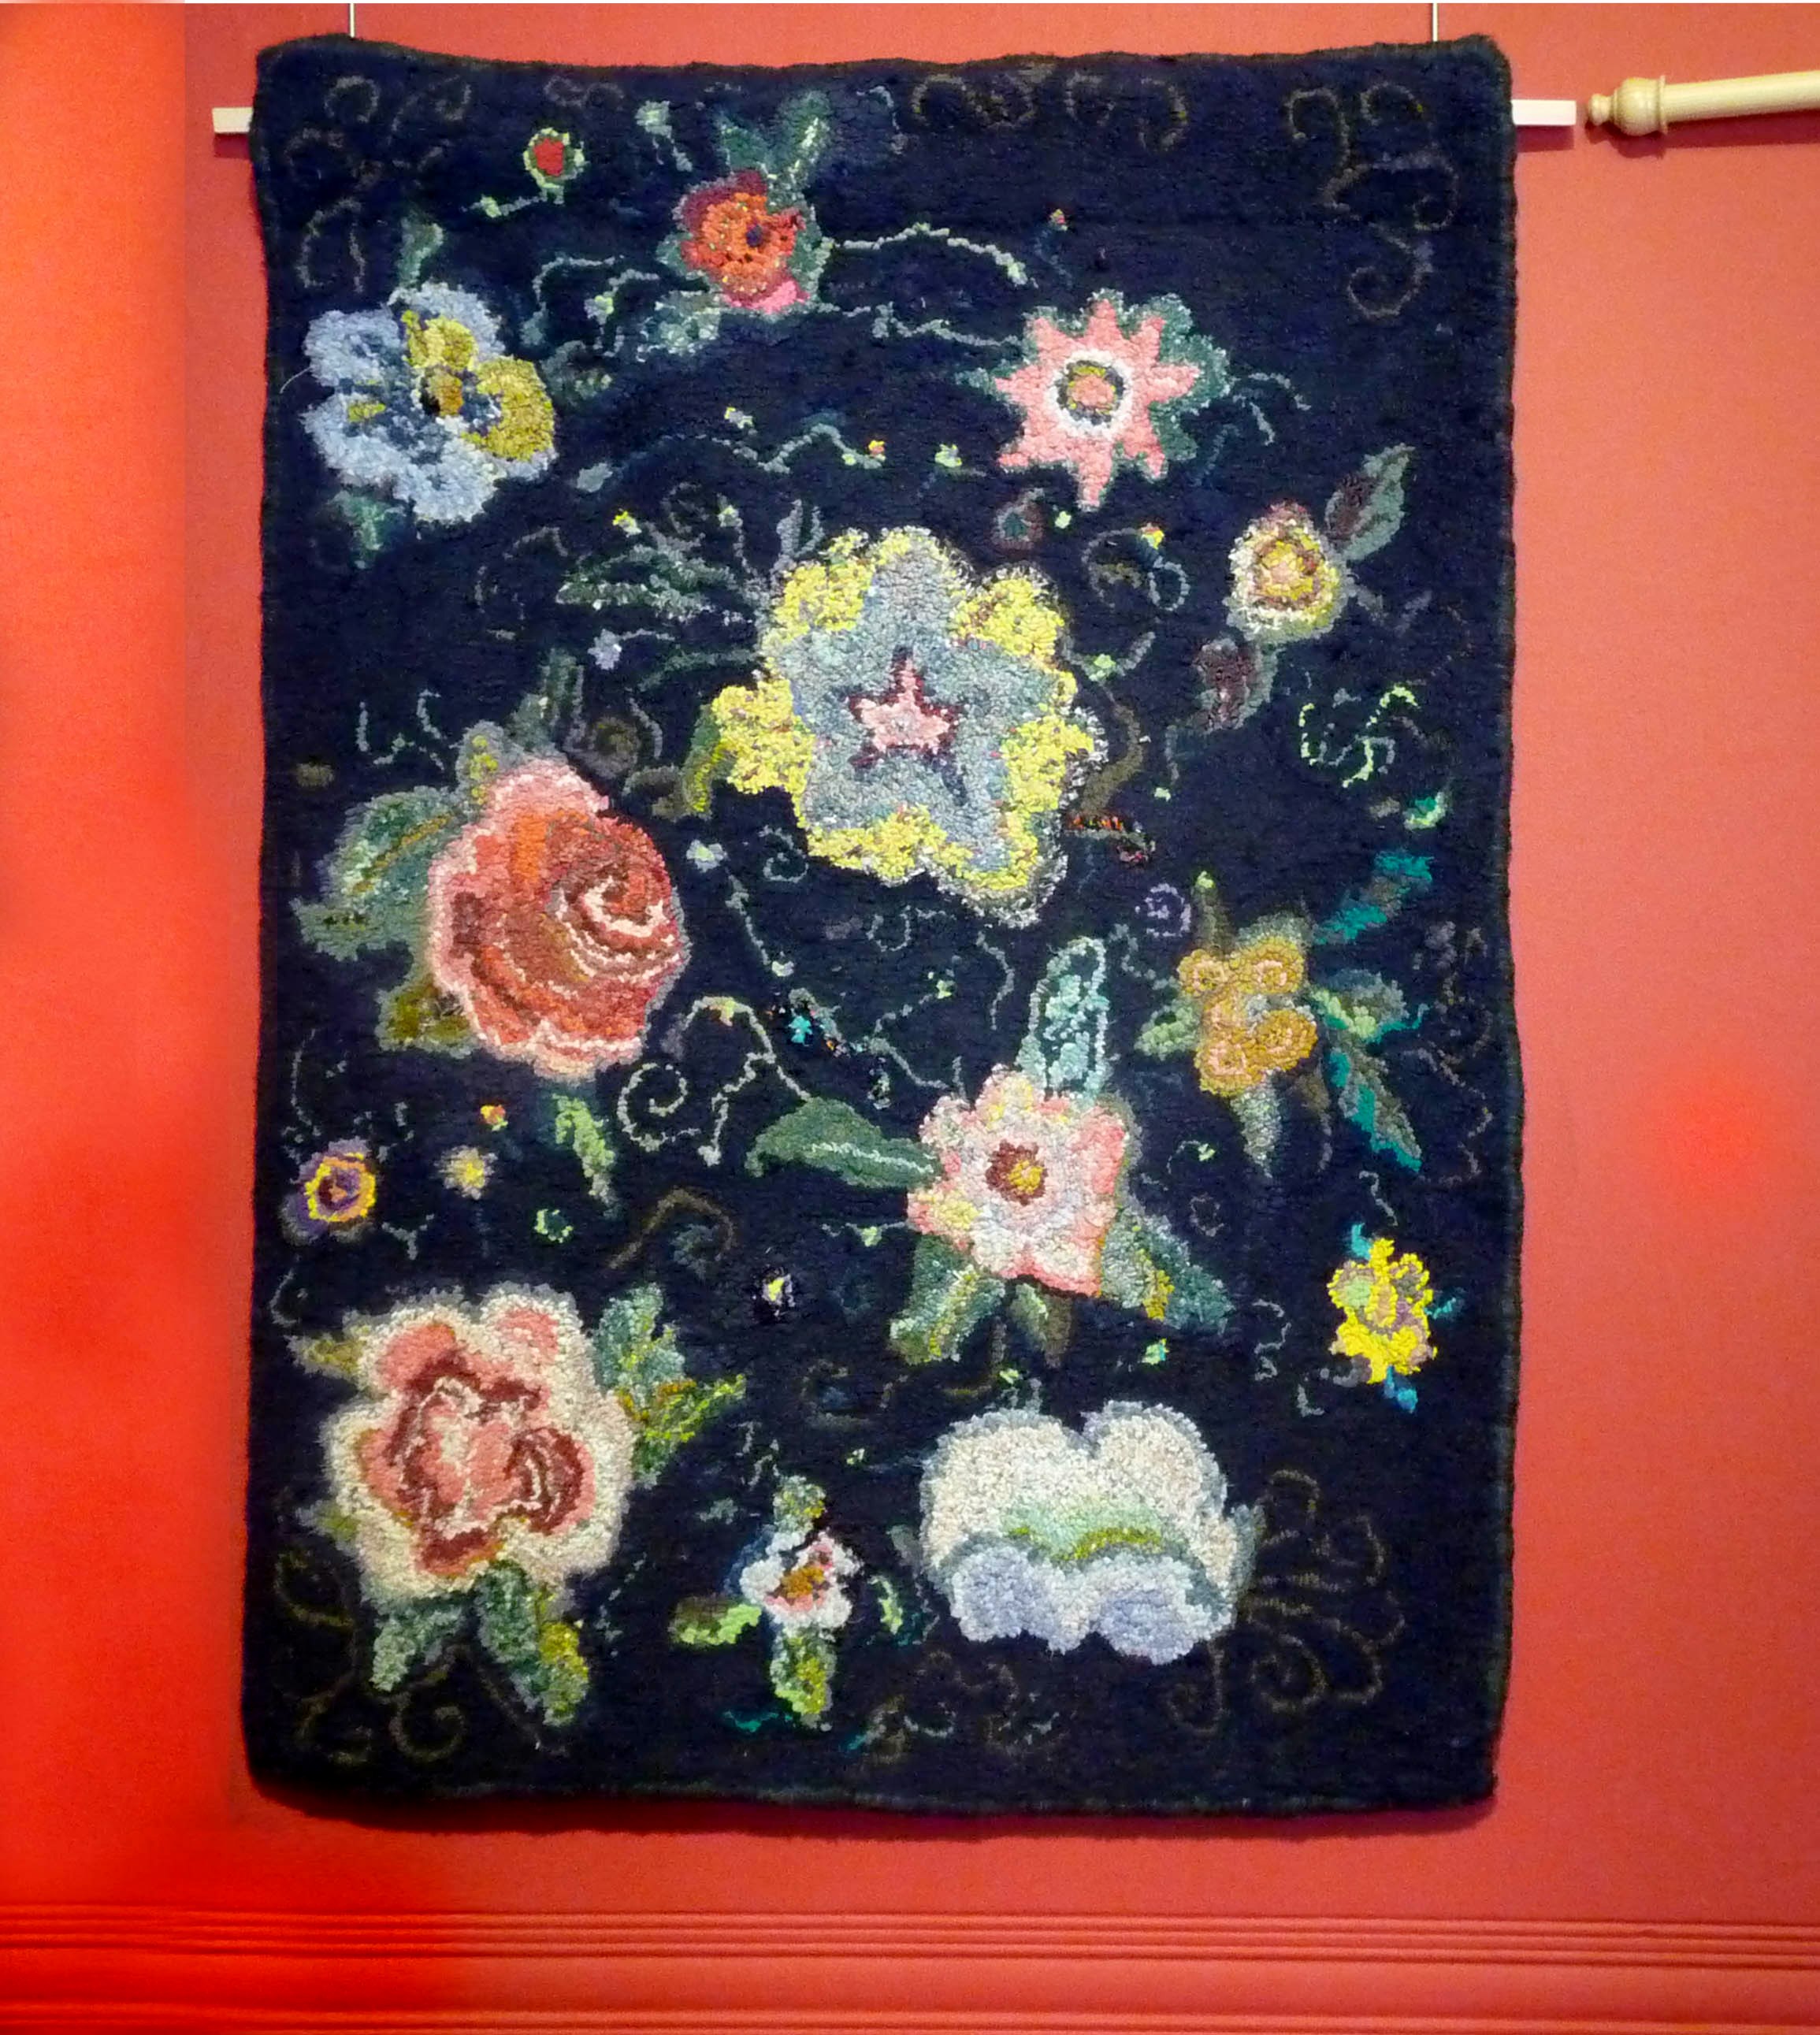 RUG, 2014, by June Howard,ragrugging in a variety of fabrics